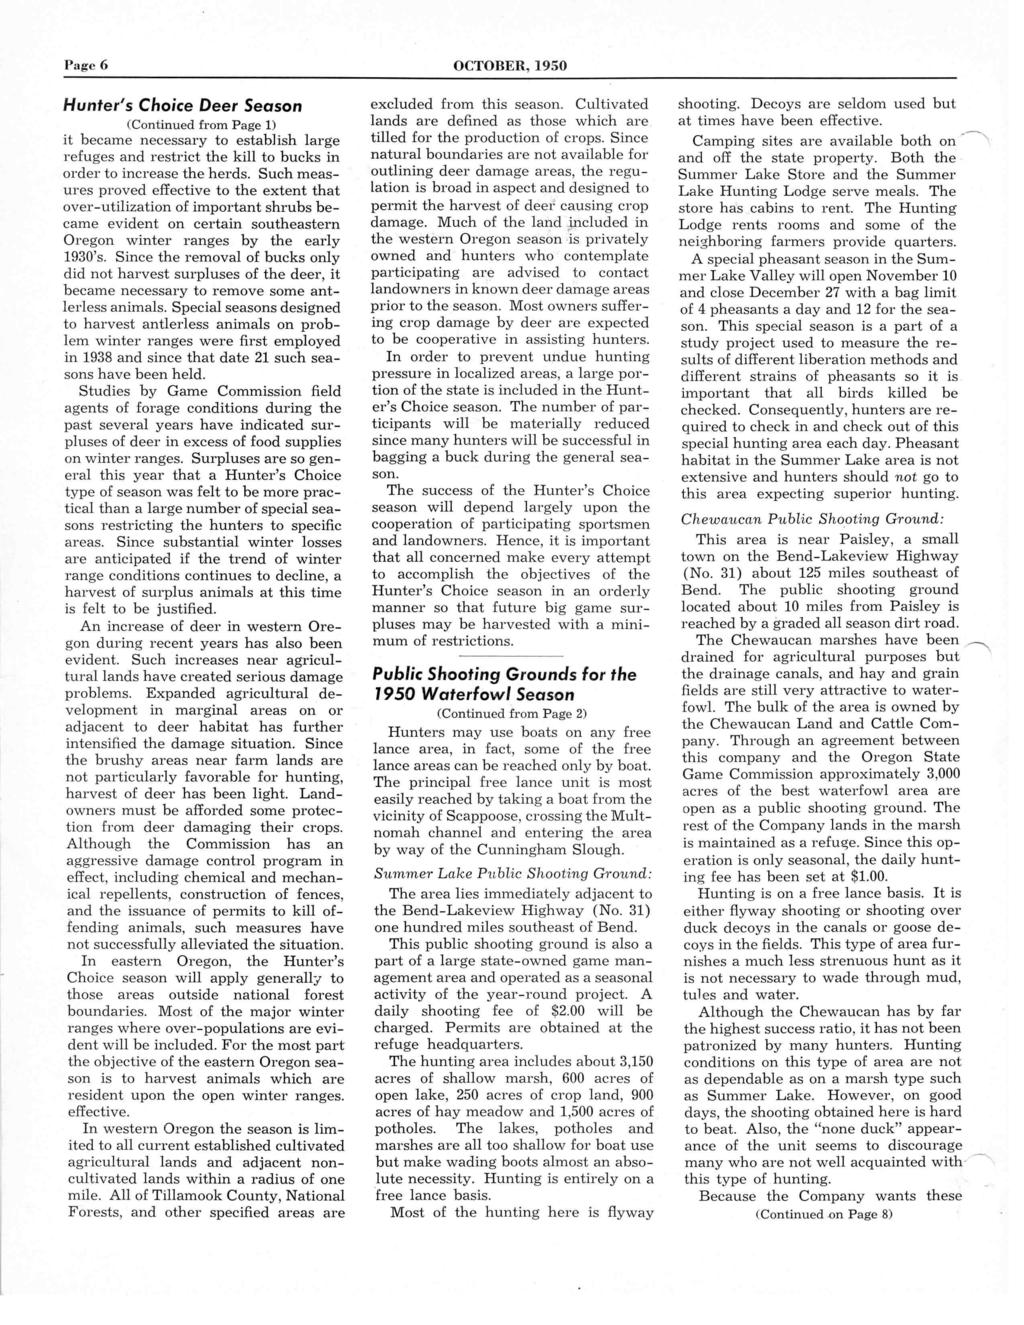 Page 6 OCTOBER, 1950 Hunter's Choice Deer Season (Continued from Page 1) it became necessary to establish large refuges and restrict the kill to bucks in order to increase the herds.